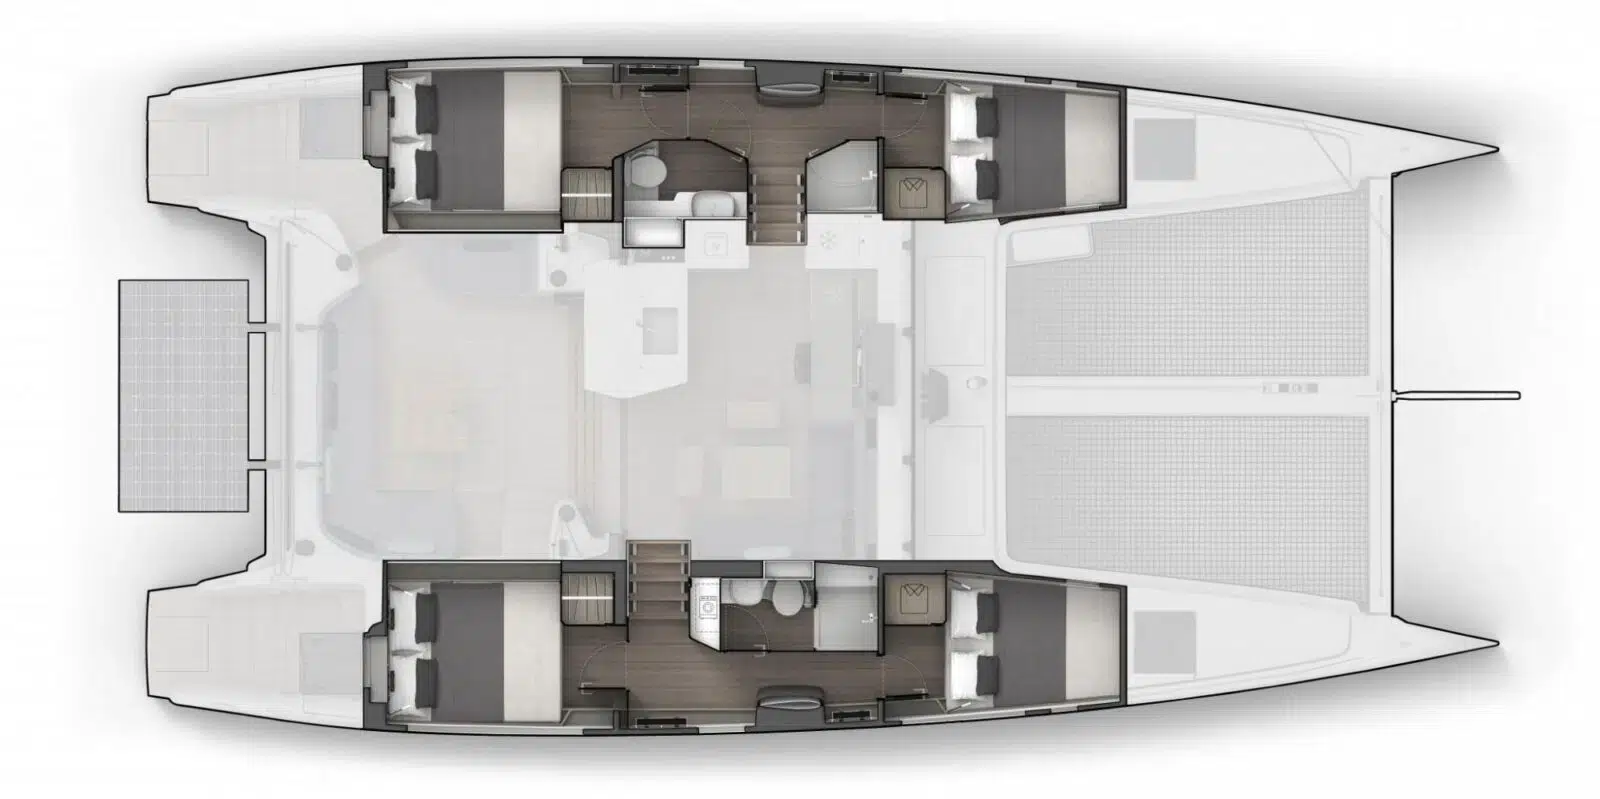 outremer 52 layout